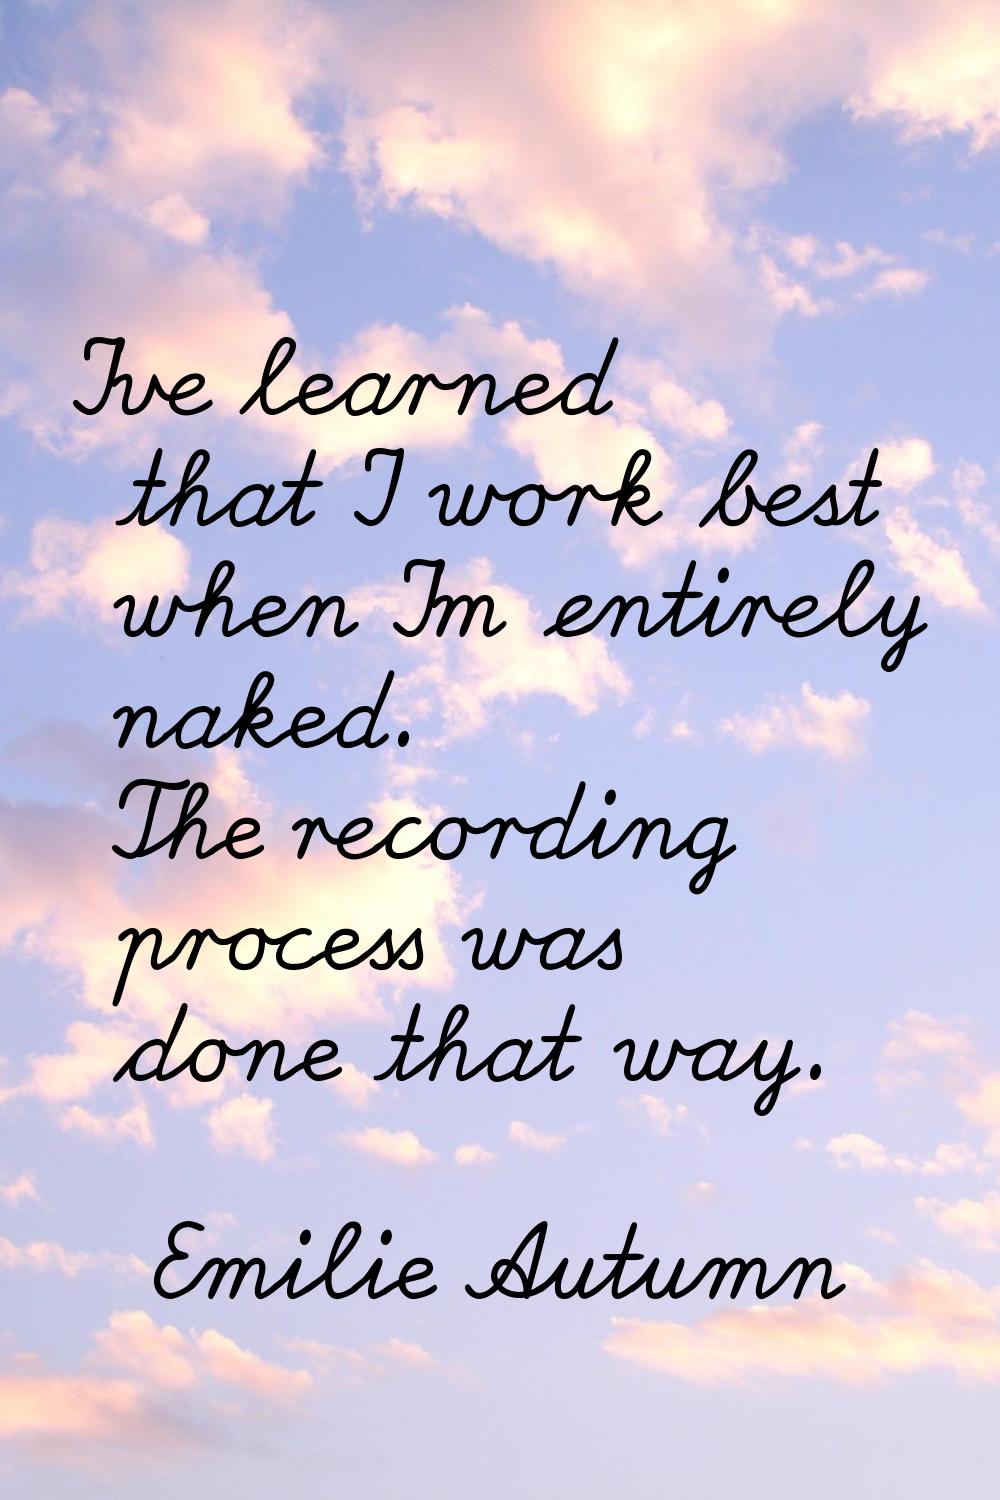 I've learned that I work best when I'm entirely naked. The recording process was done that way.